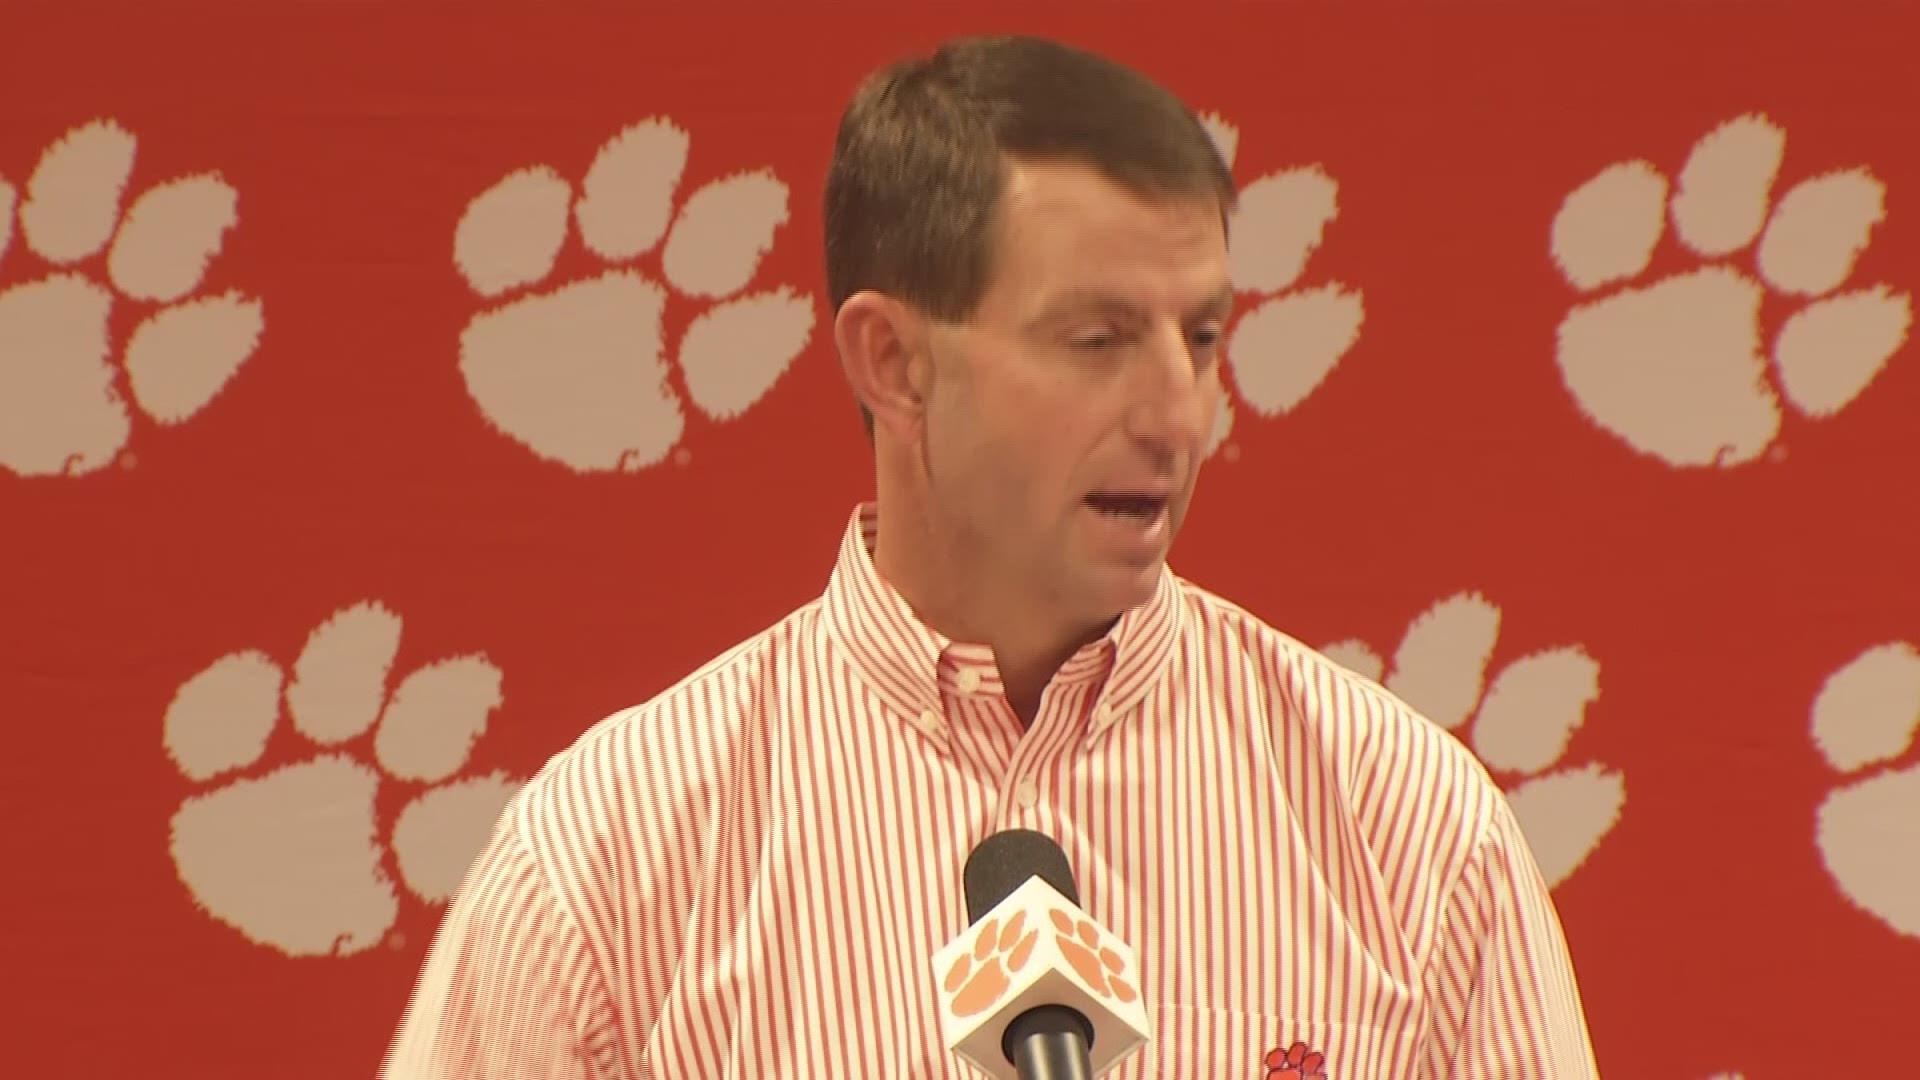 Clemson head football coach Dabo Swinney was a lot more reserved but still just as firm in his belief that every win is to be appreciated.